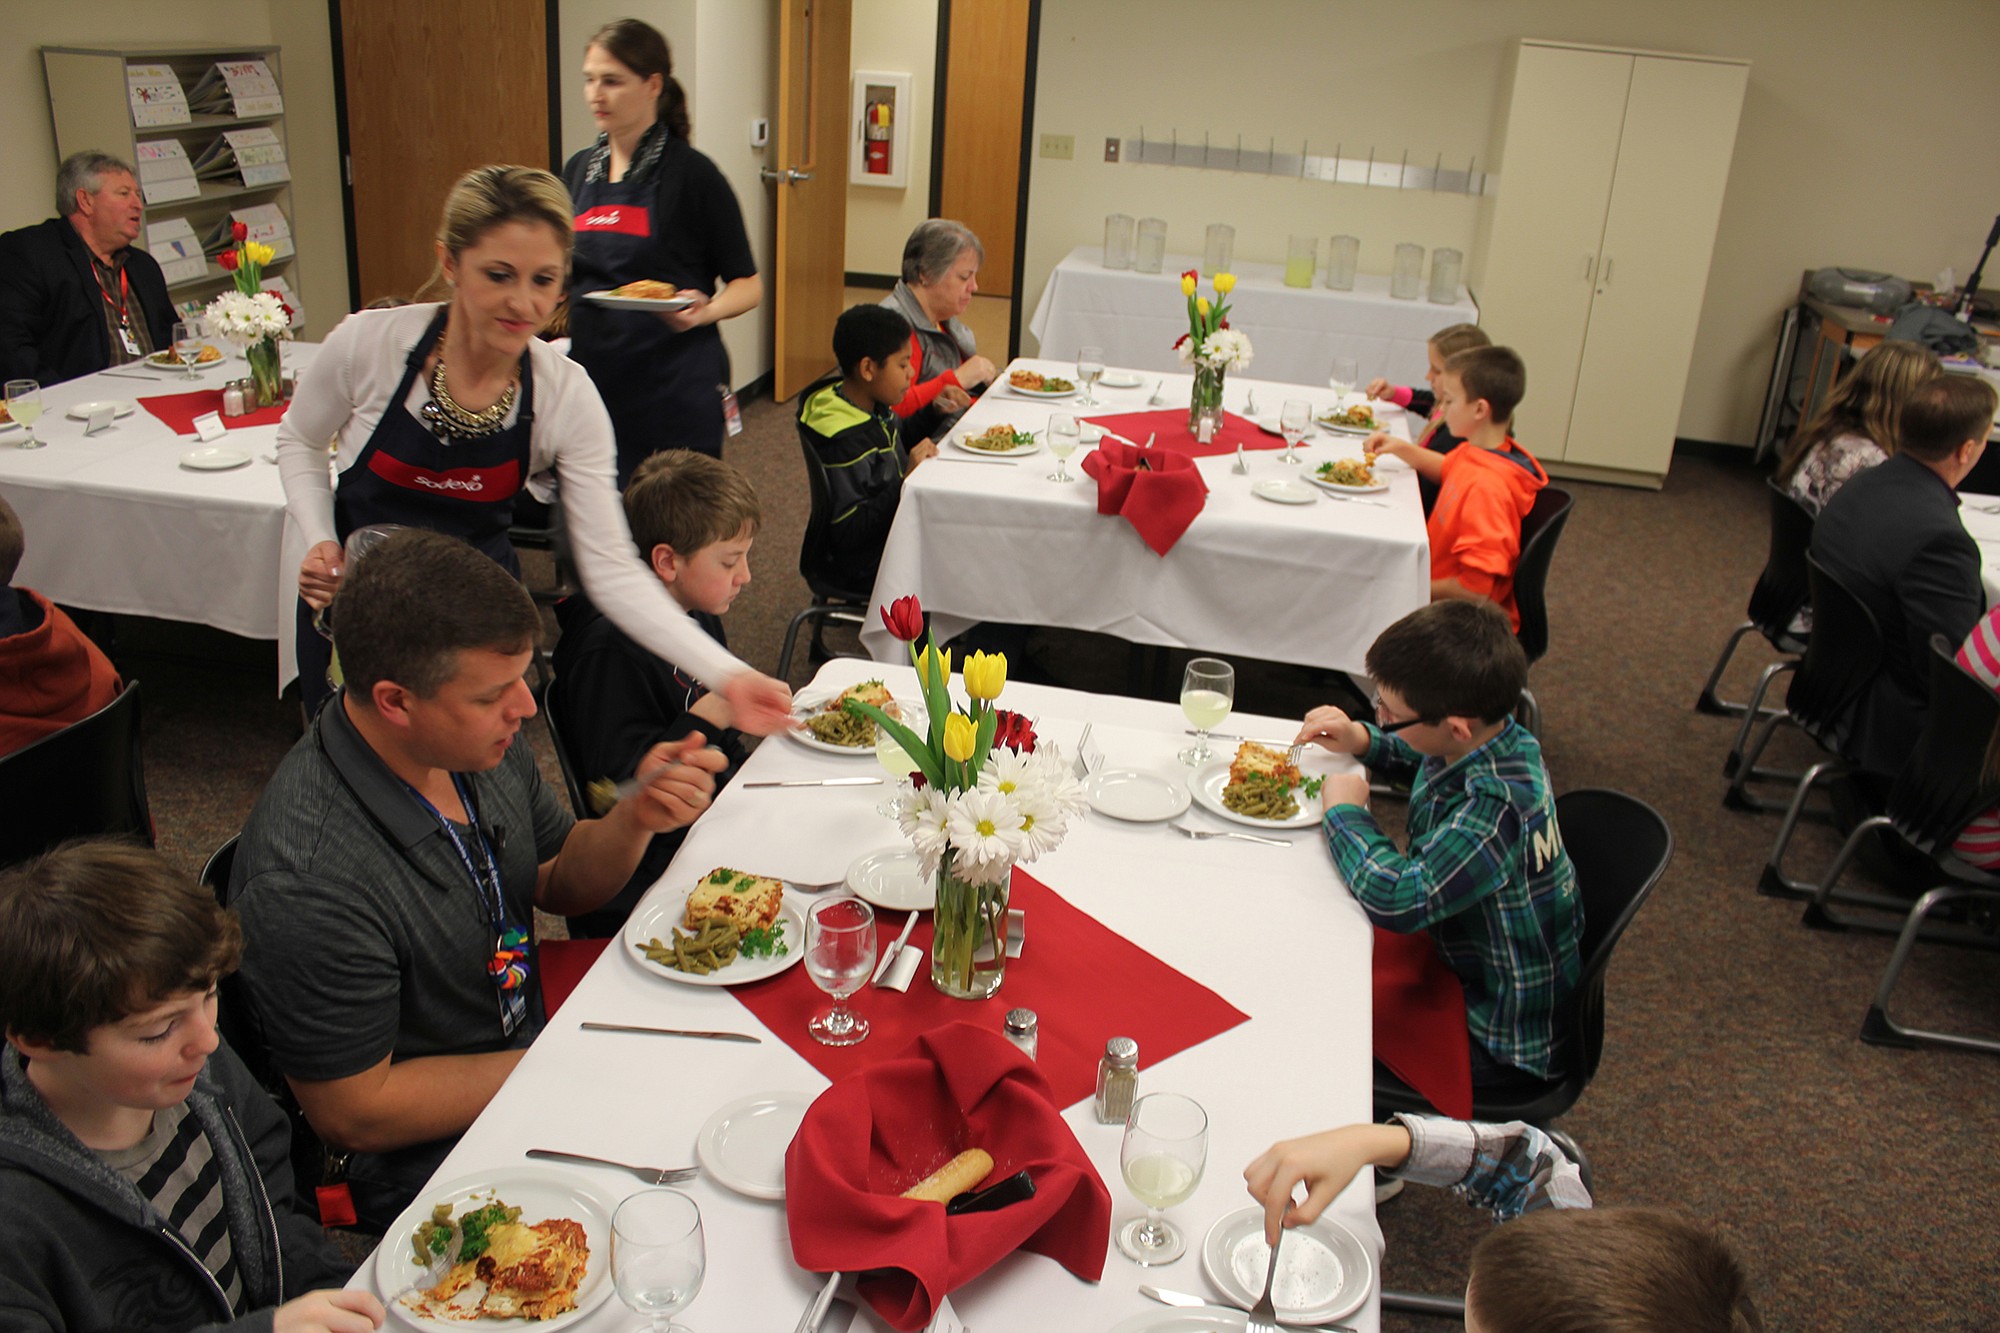 Battle Ground: A fifth-grade class at Daybreak Middle School recently learned about fine dining thanks to an educational four-course meal.